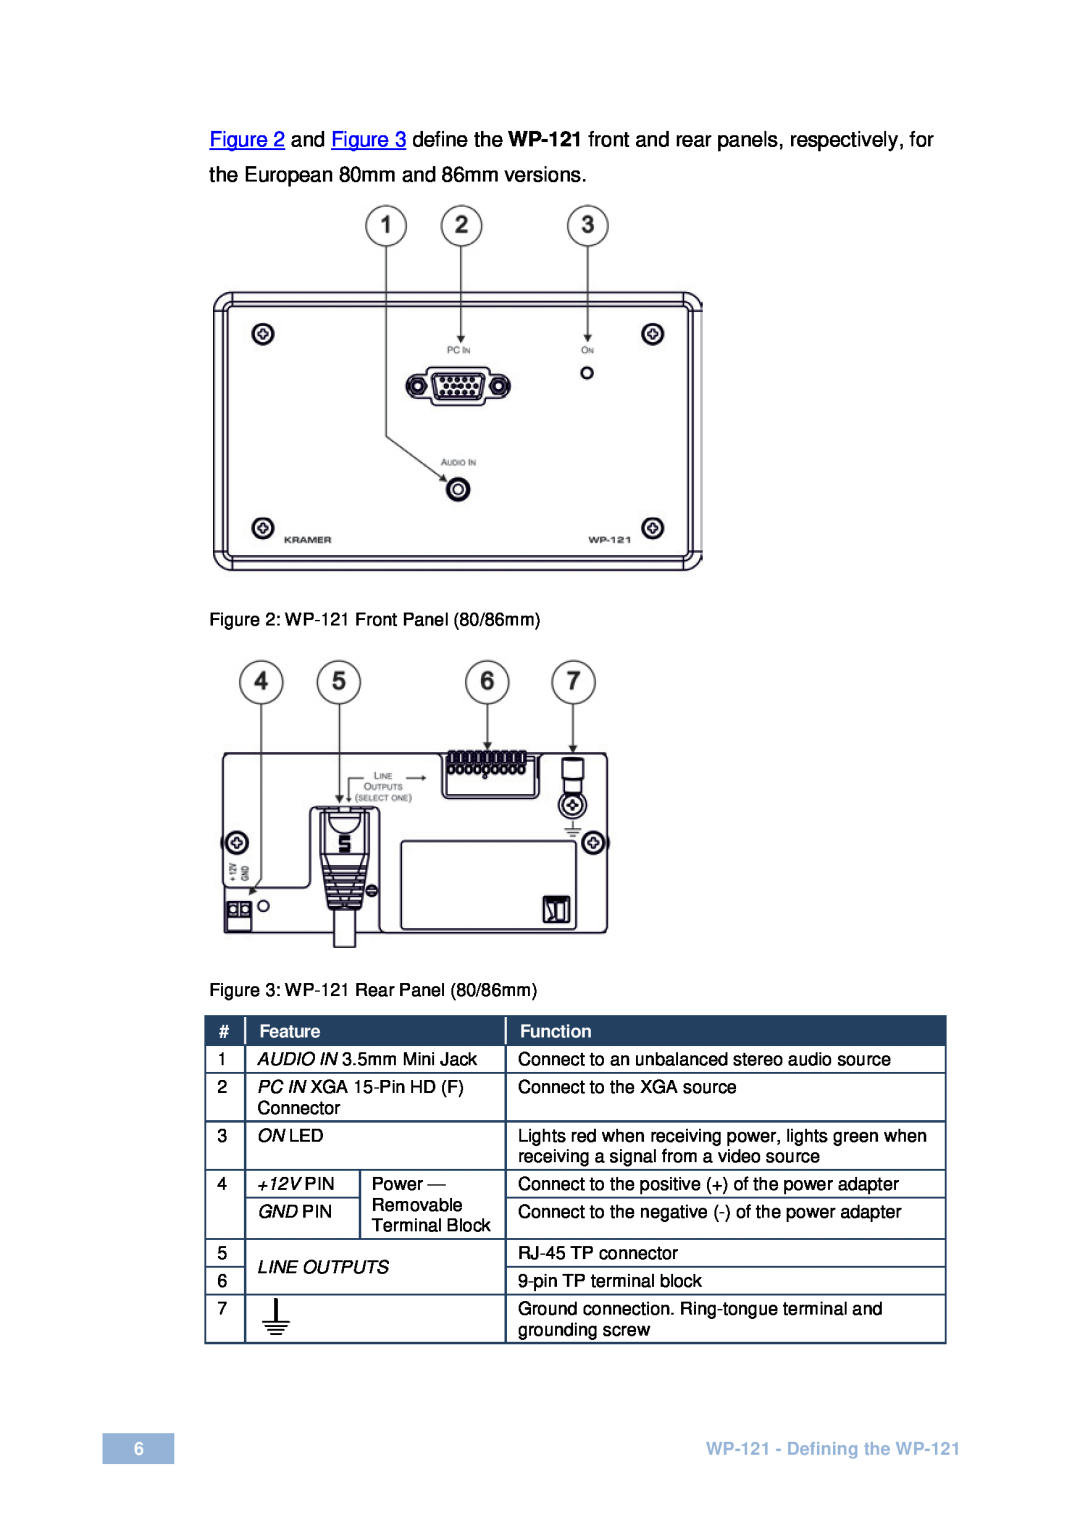 Kramer Electronics user manual Feature, Function, On Led, +12V PIN, Gnd Pin, Line Outputs, WP-121- Defining the WP-121 